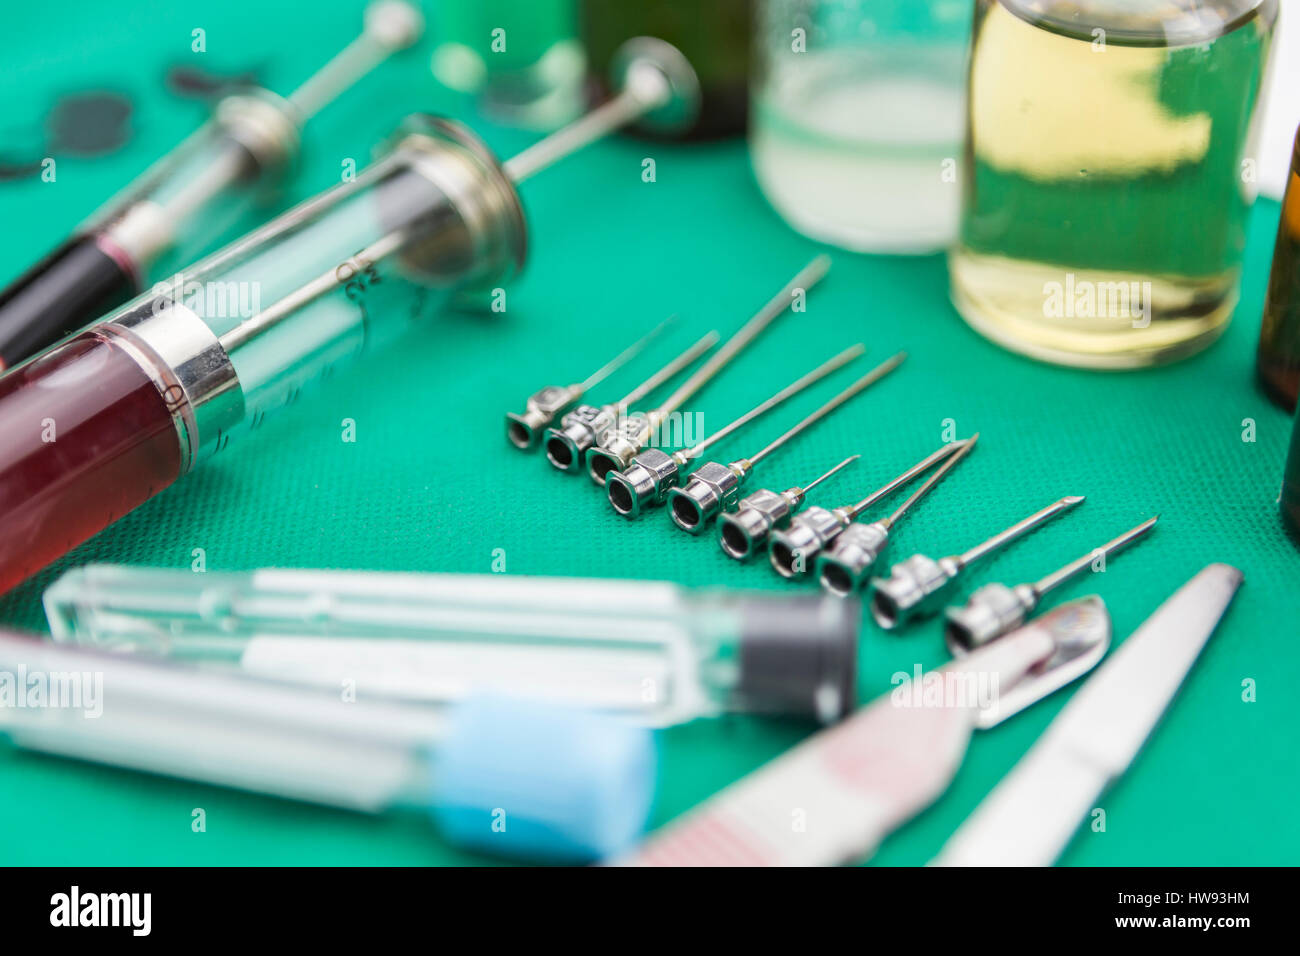 Needles metal of various sizes next to syringes in a table of op Stock Photo